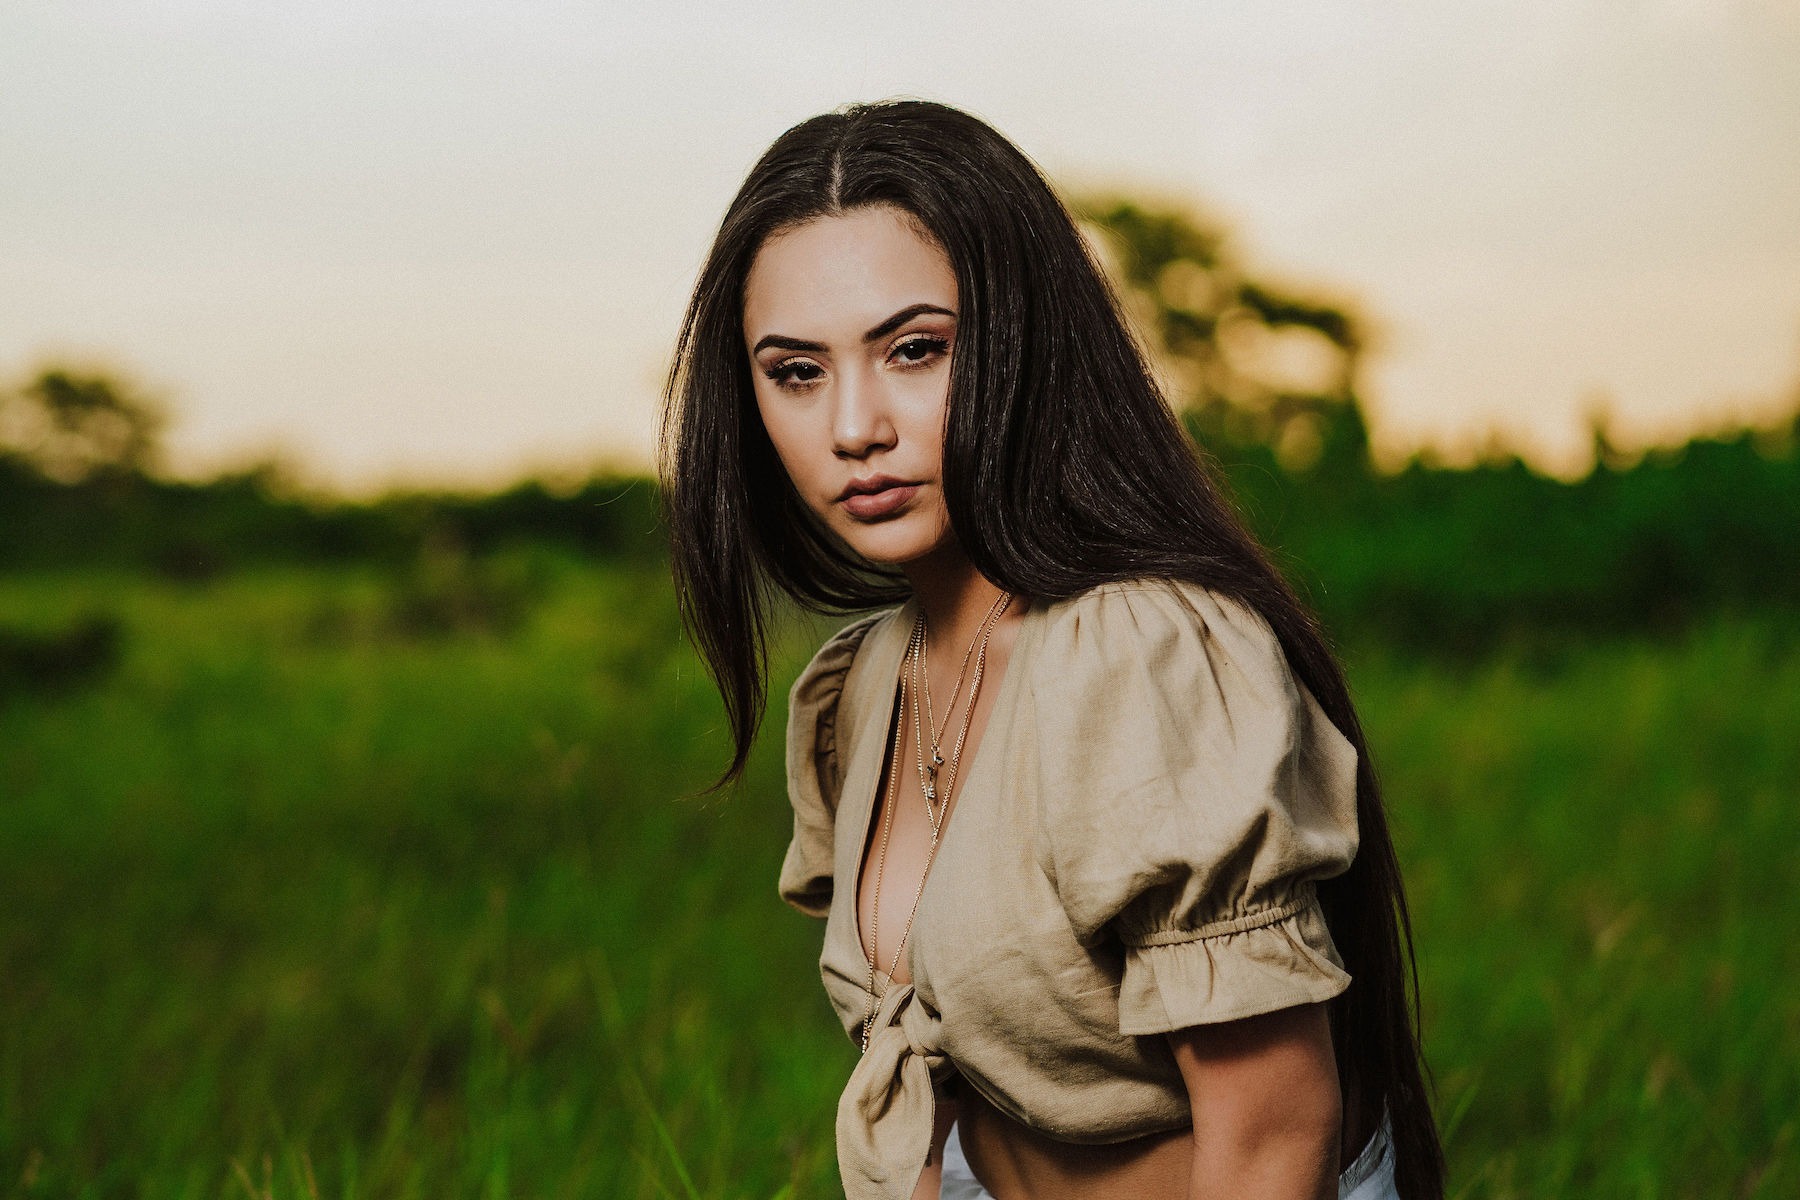 Gabriela Wraps Up 2020 With Brand New Single ‘Sun & Earth’